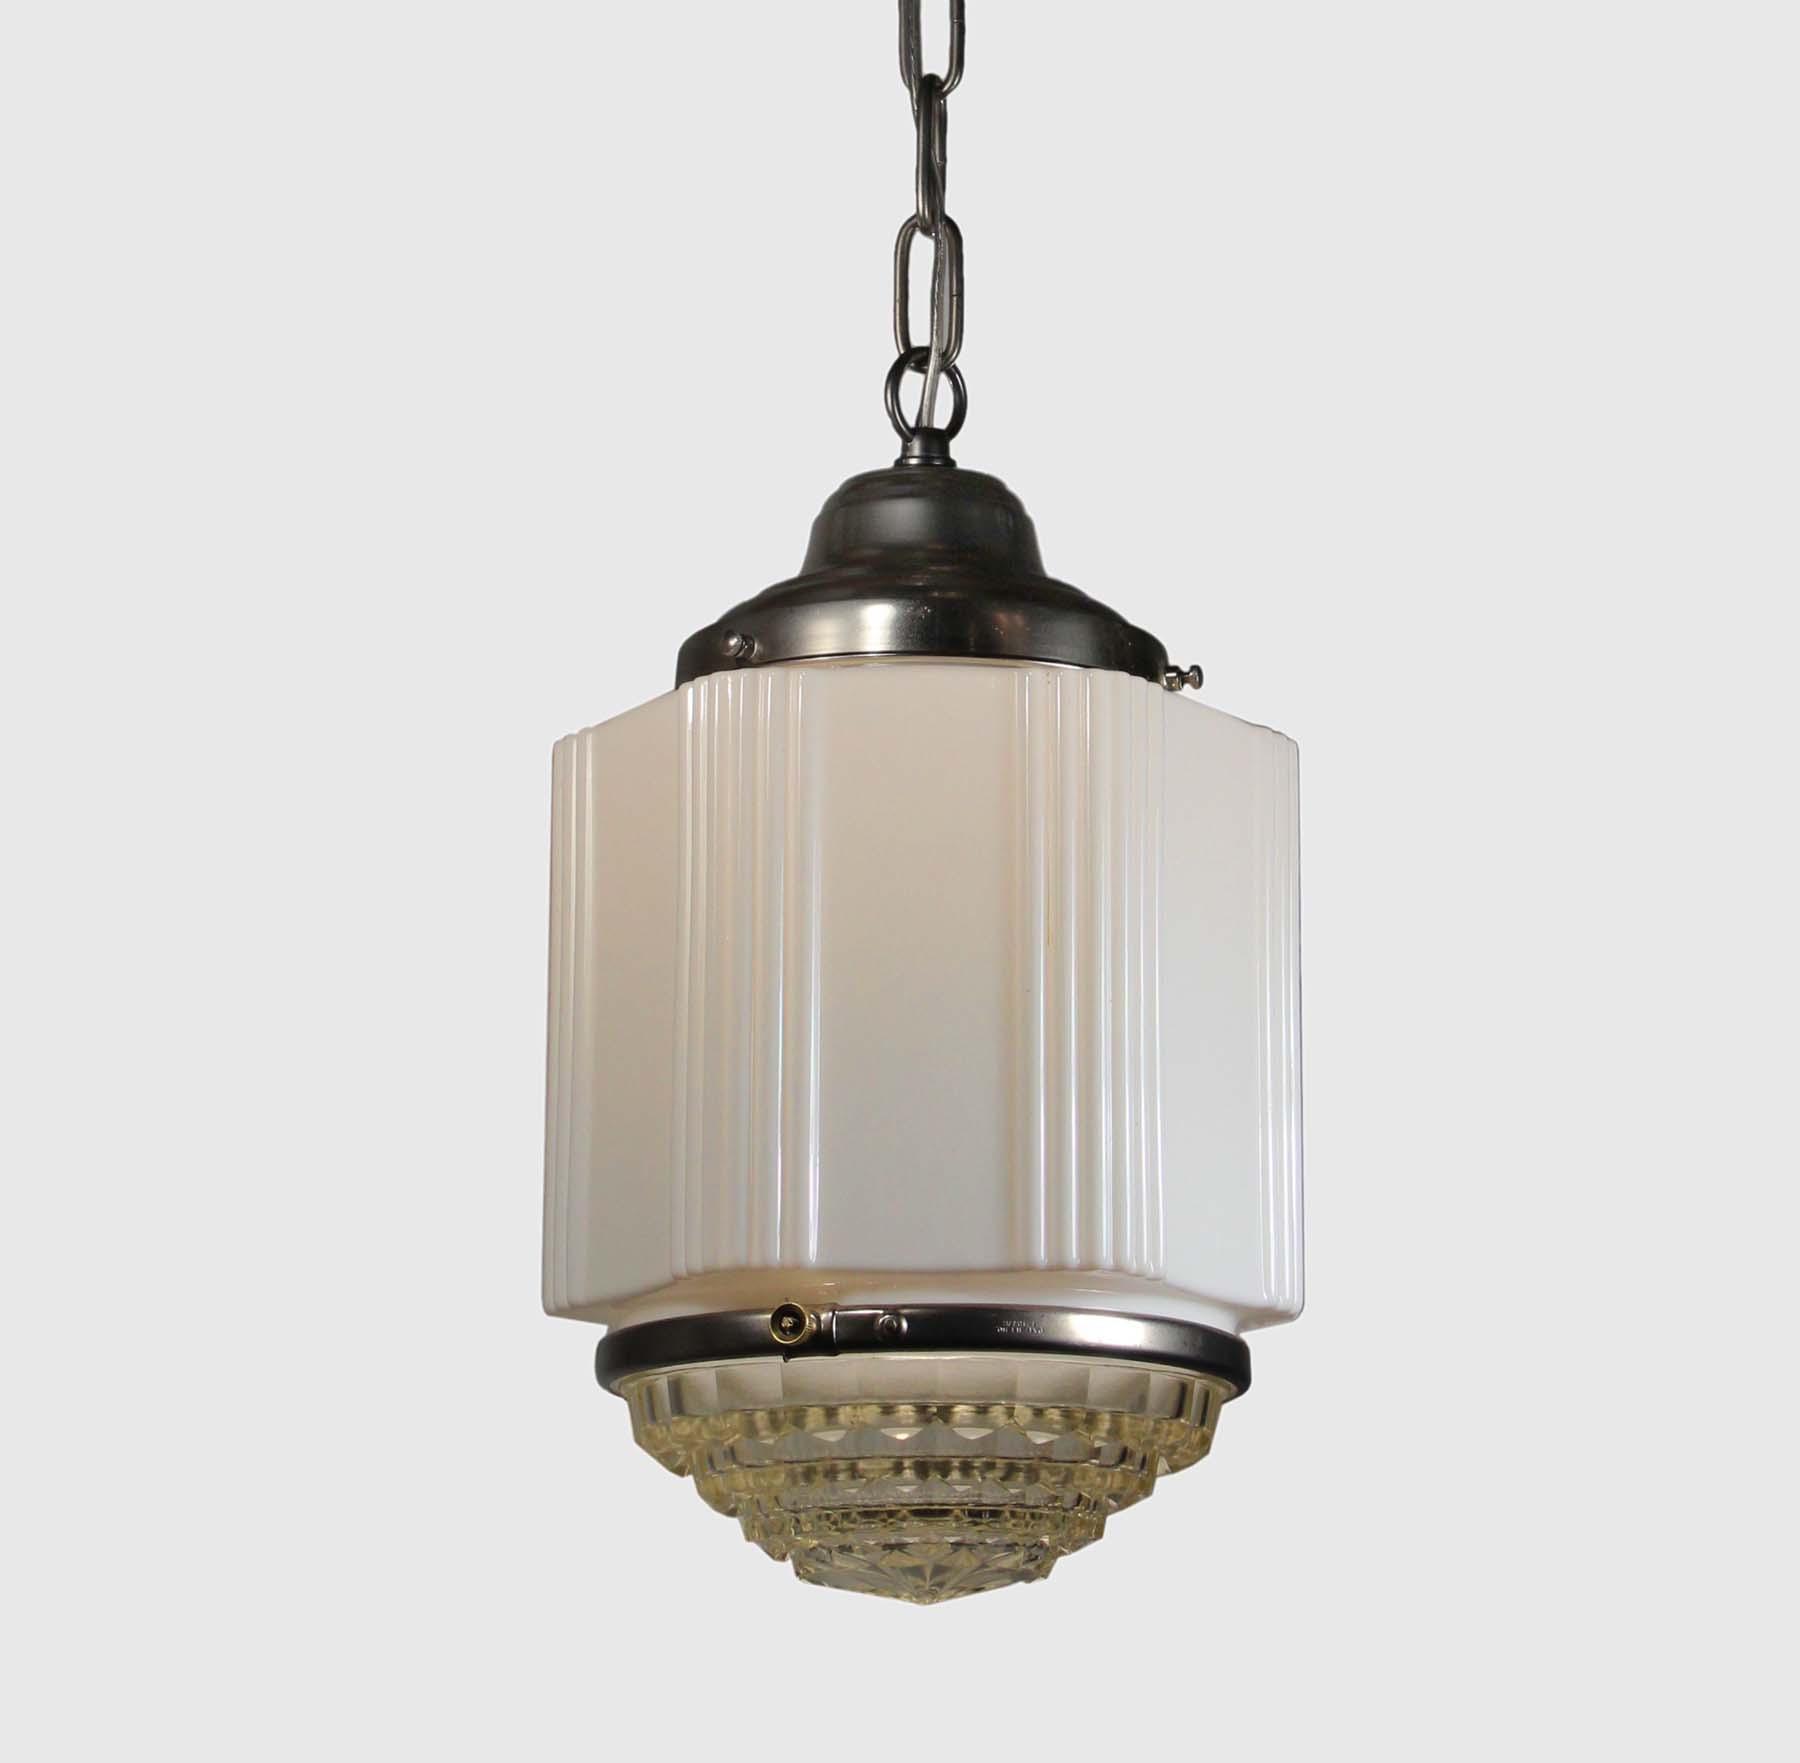 SOLD Matching Art Deco Skyscraper Pendant Lights with Two-Part Prismatic Shade-68873